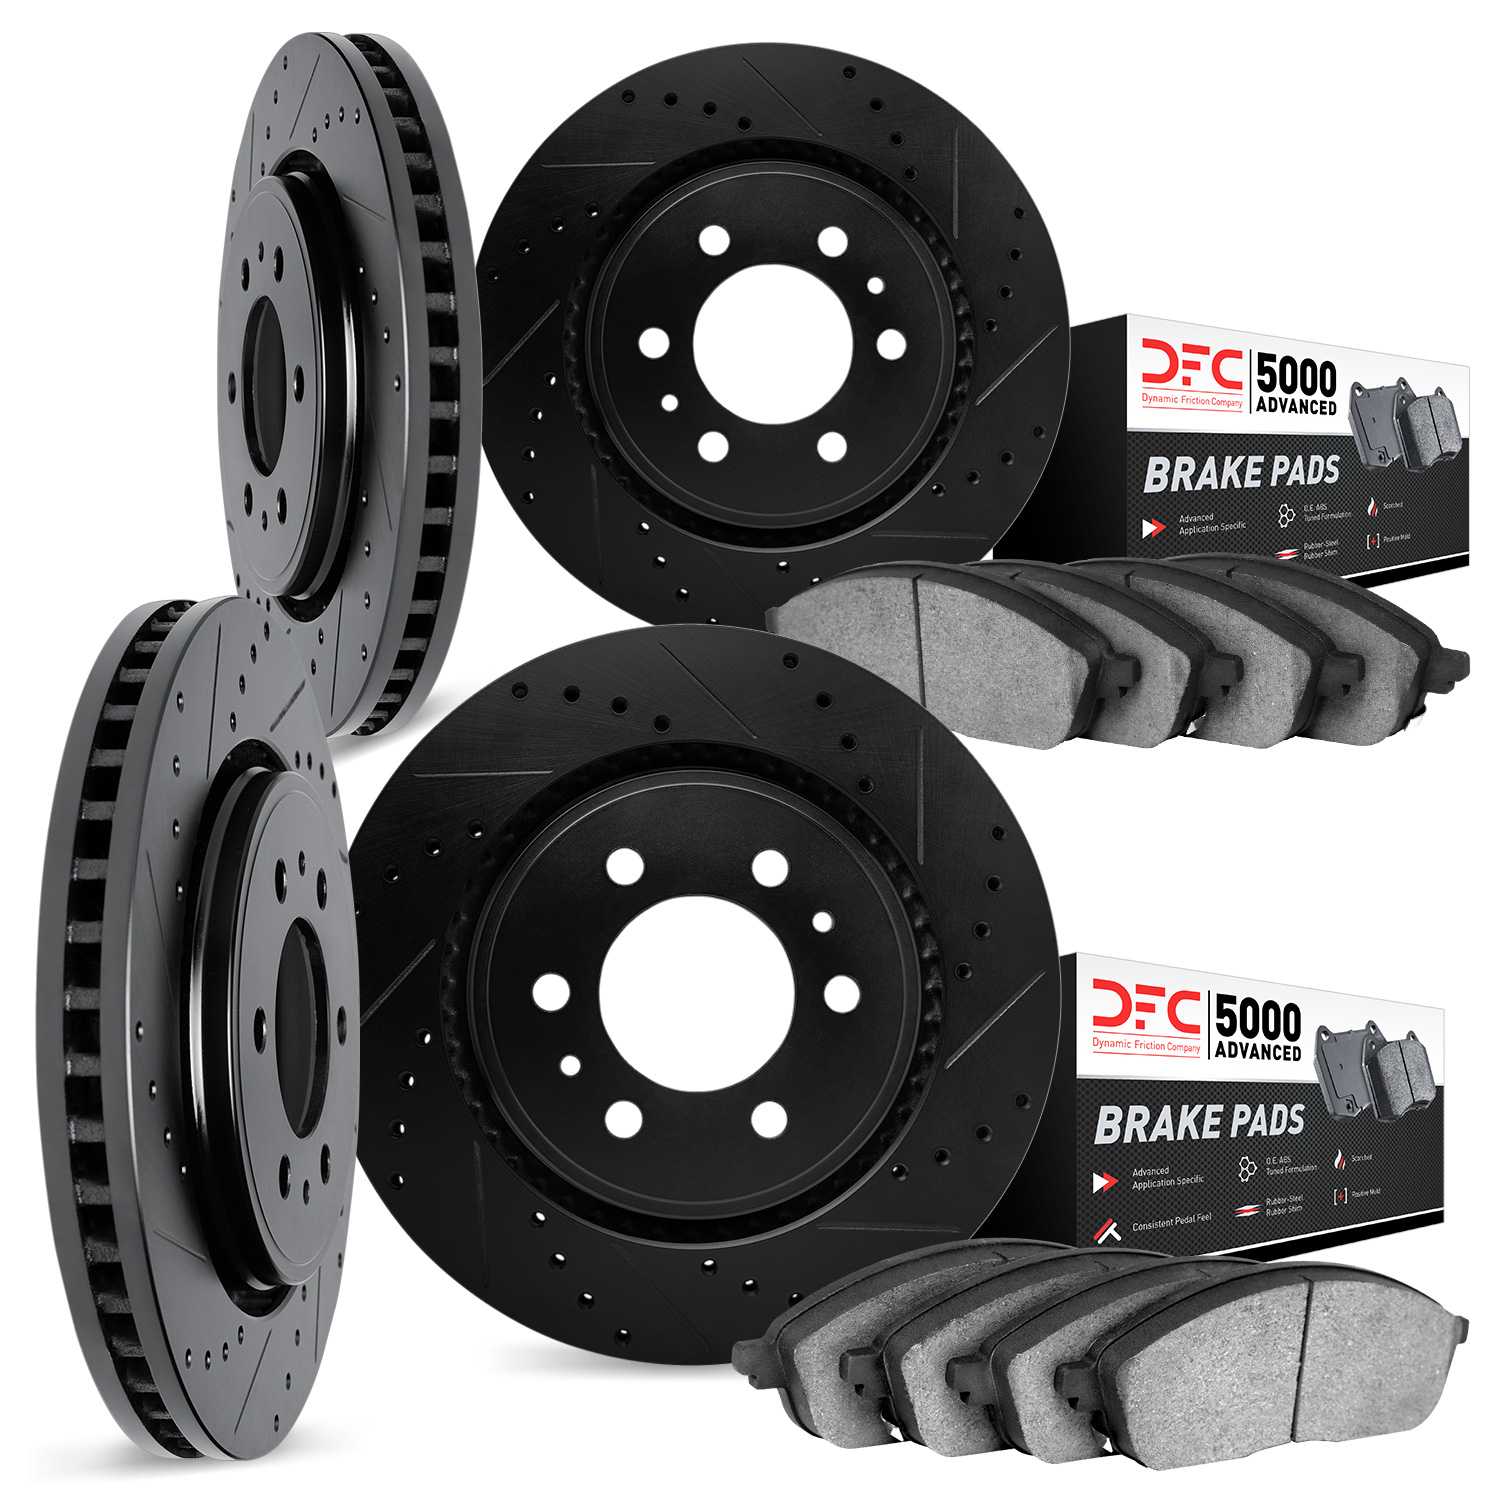 8504-68011 Drilled/Slotted Brake Rotors w/5000 Advanced Brake Pads Kit [Black], Fits Select Infiniti/Nissan, Position: Front and